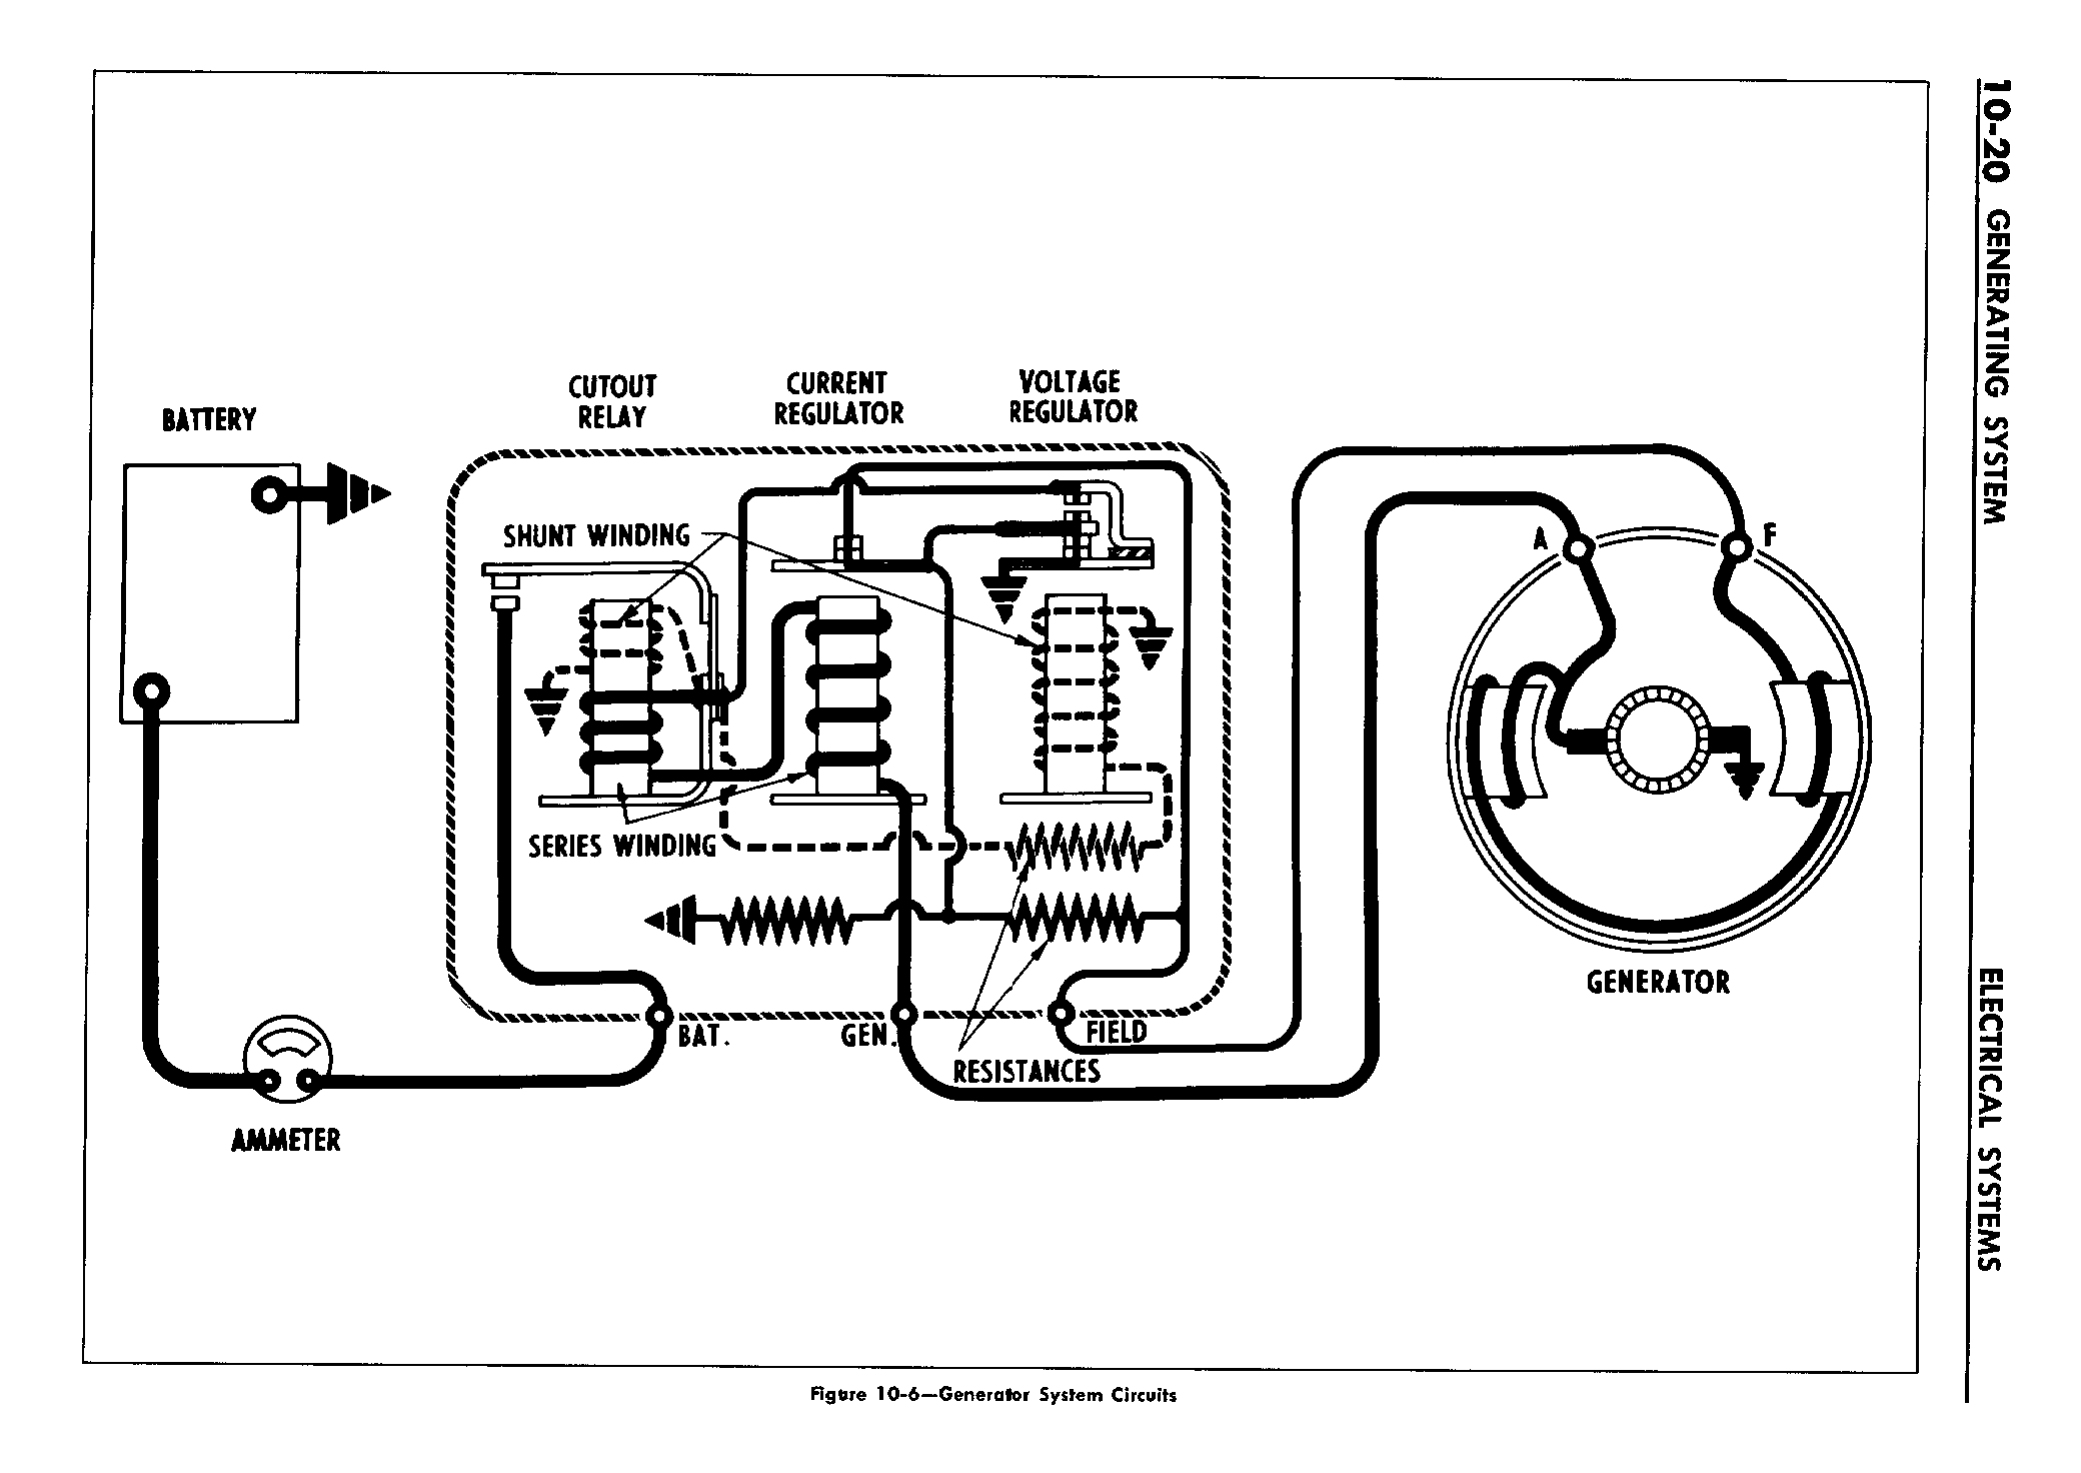 n_11 1958 Buick Shop Manual - Electrical Systems_20.jpg